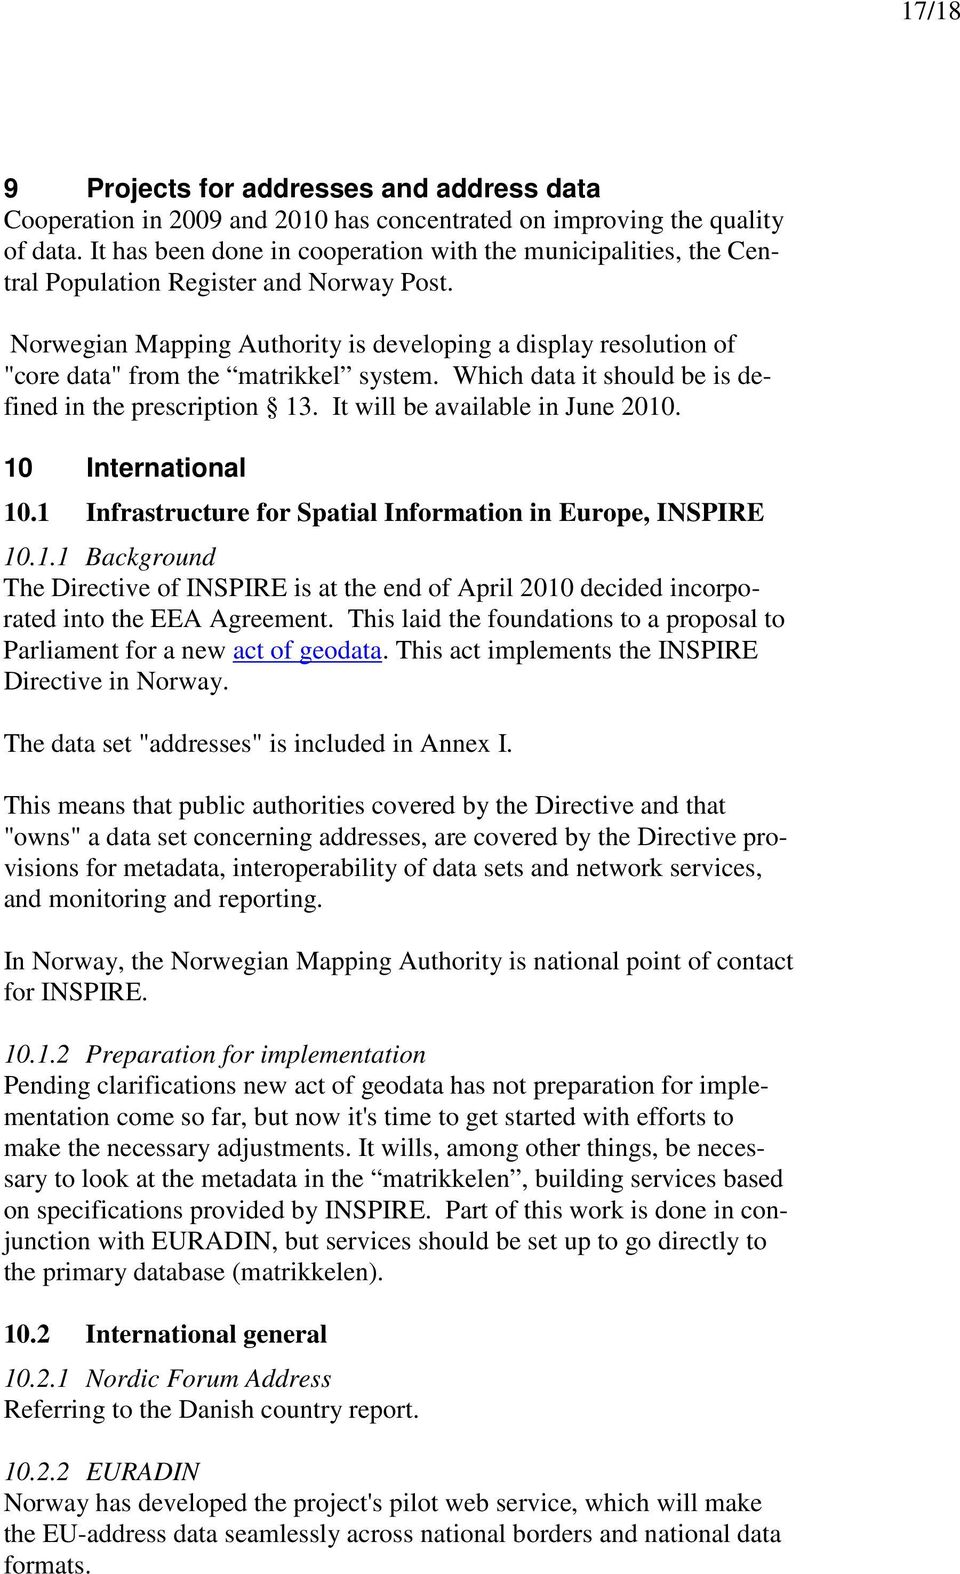 Norwegian Mapping Authority is developing a display resolution of "core data" from the matrikkel system. Which data it should be is defined in the prescription 13. It will be available in June 2010.